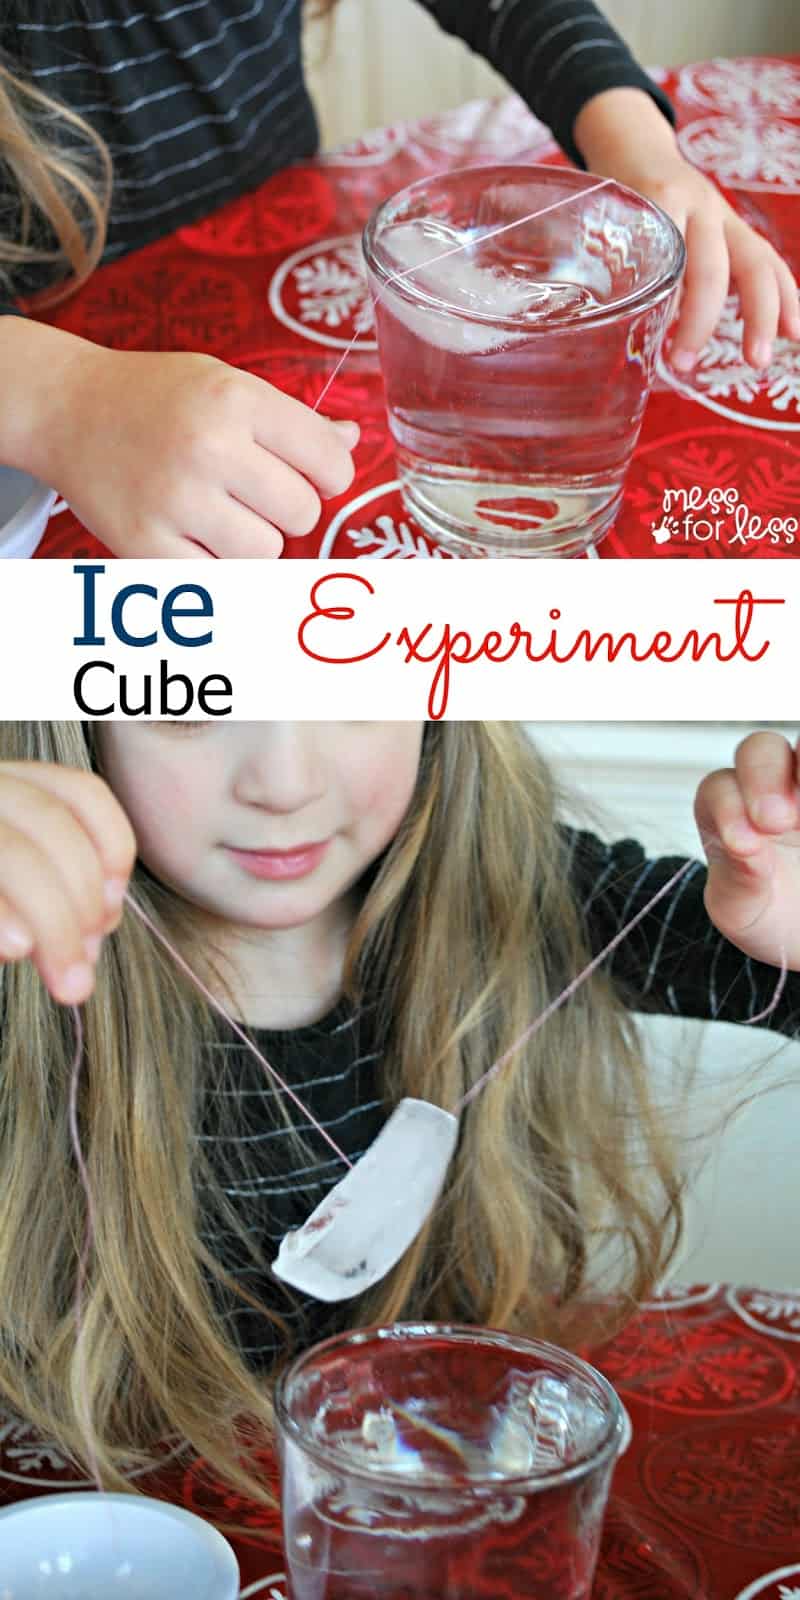 Ice Cube Experiment - Can you pick up an ice cube using a piece of thread? Find out how in this simple science experiment for kids.